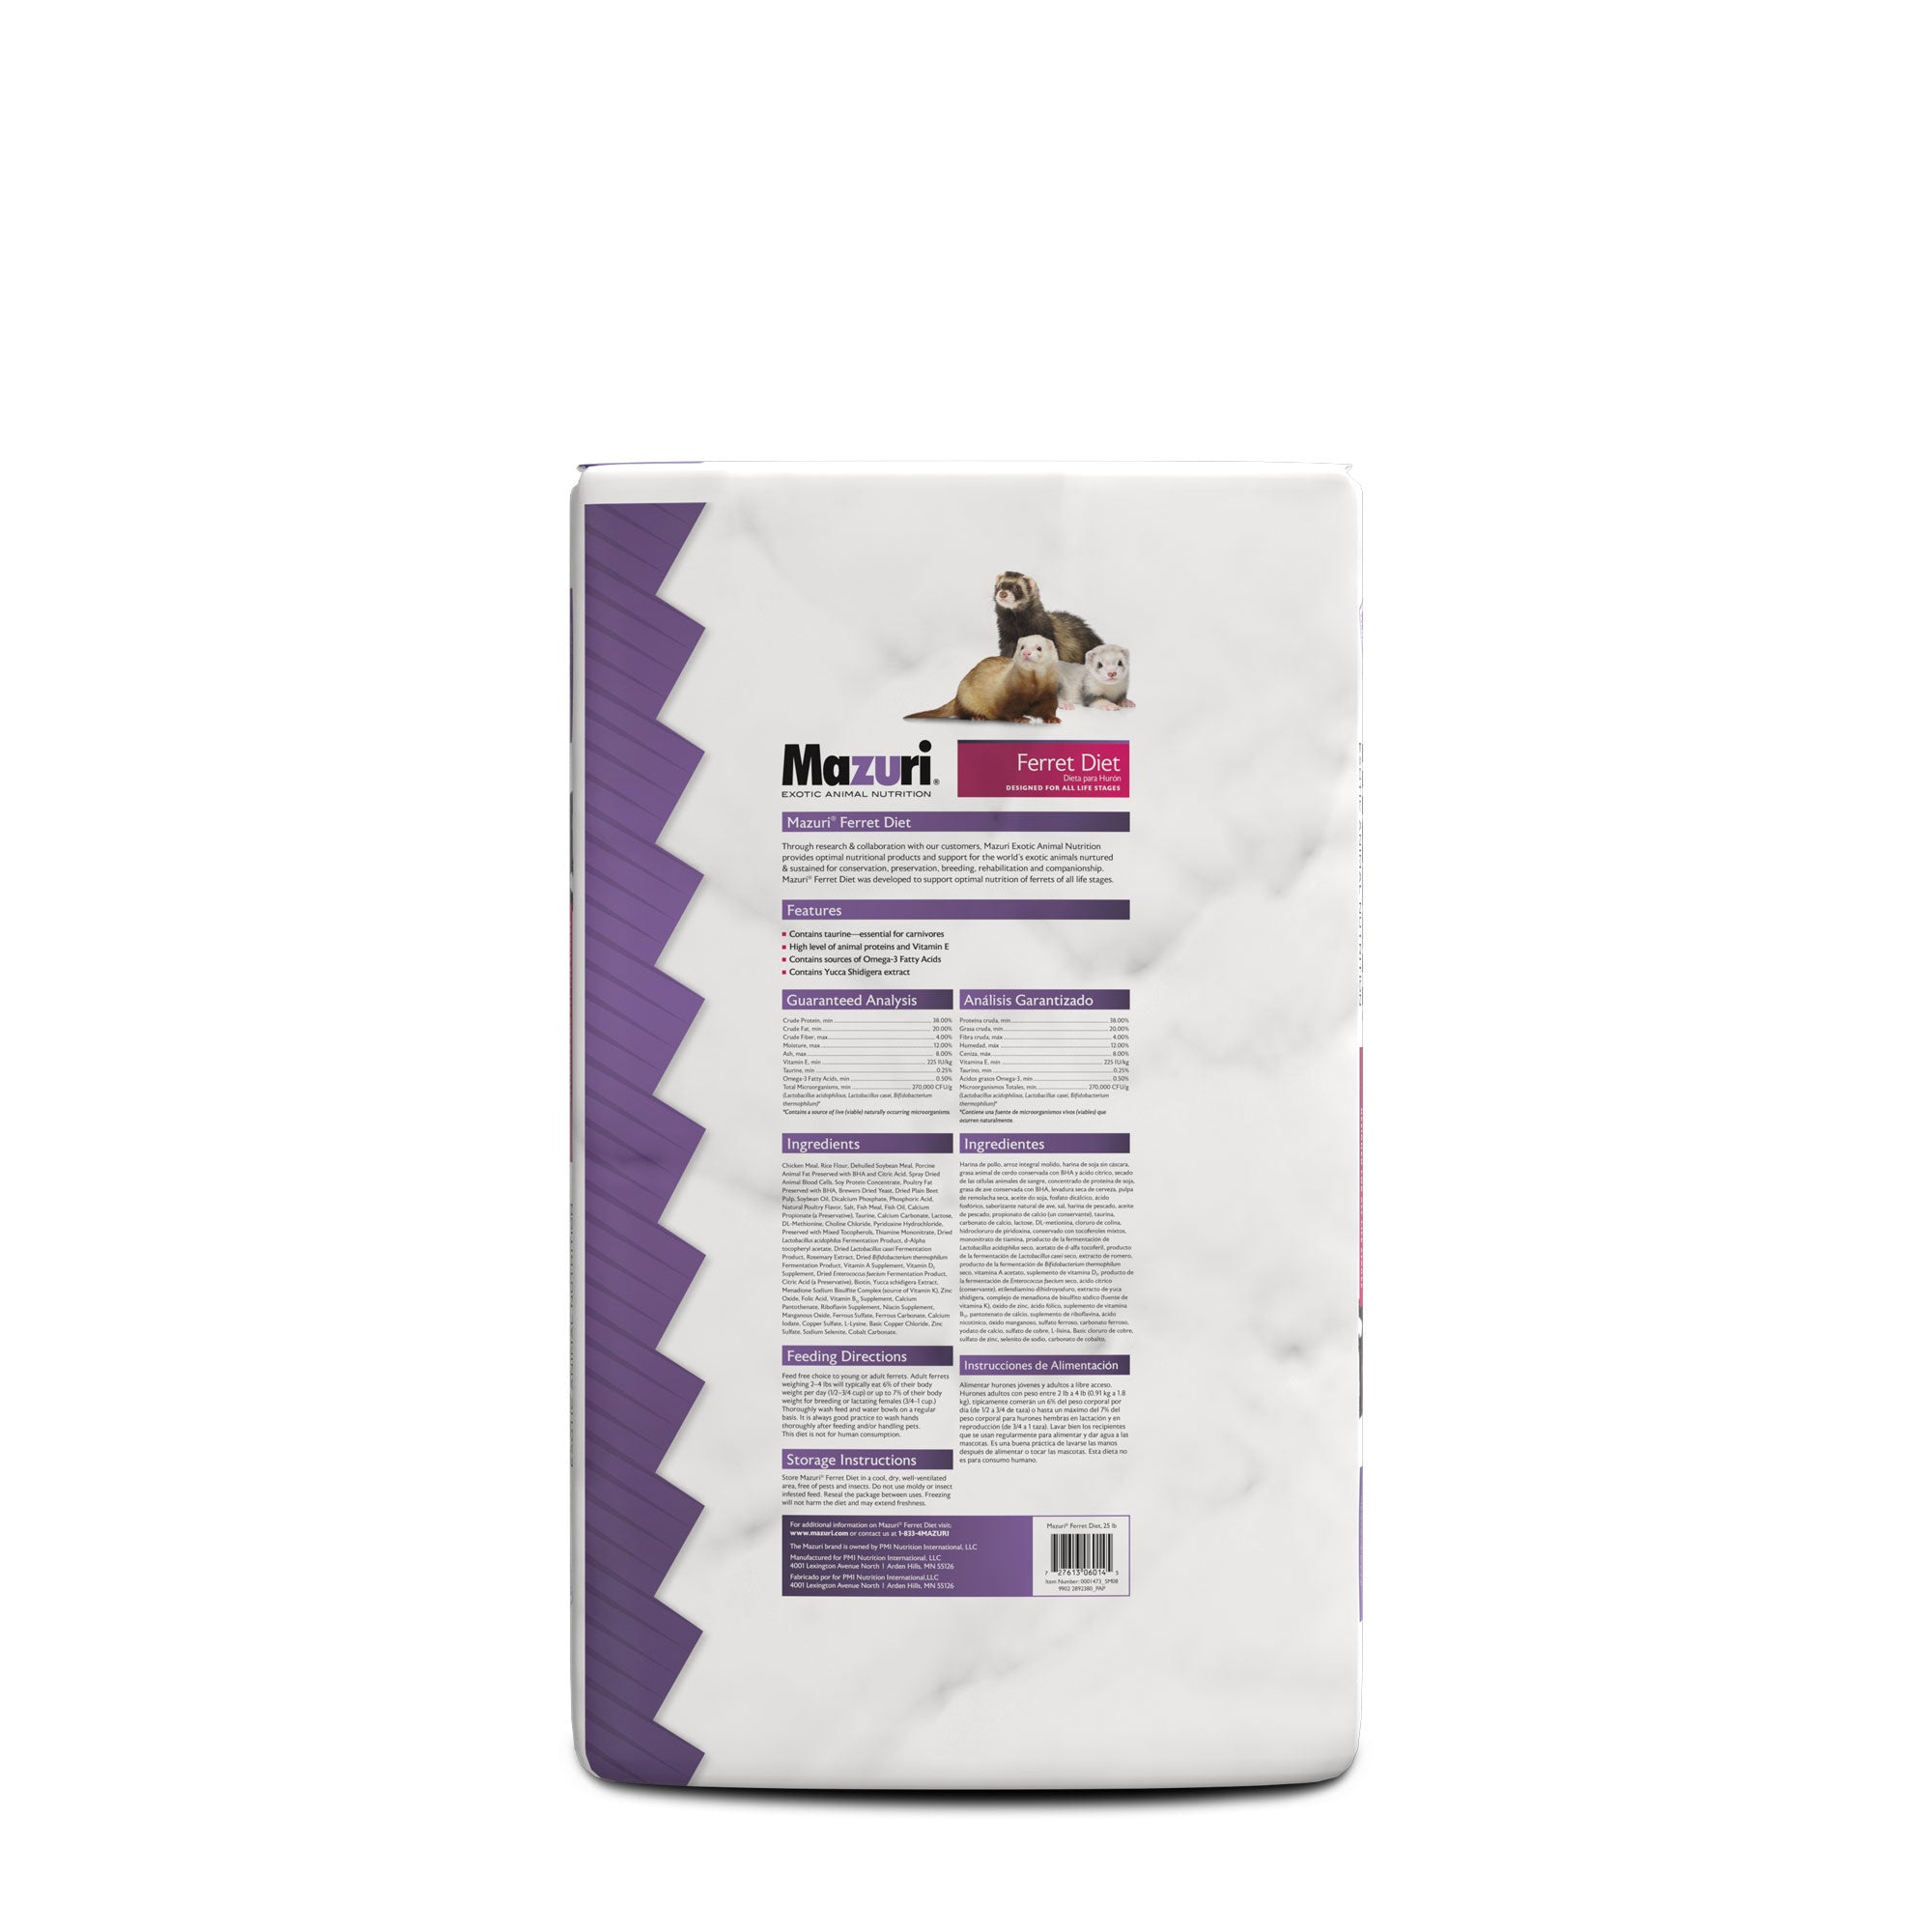 Ferret Diet 25 pound bag back with product information